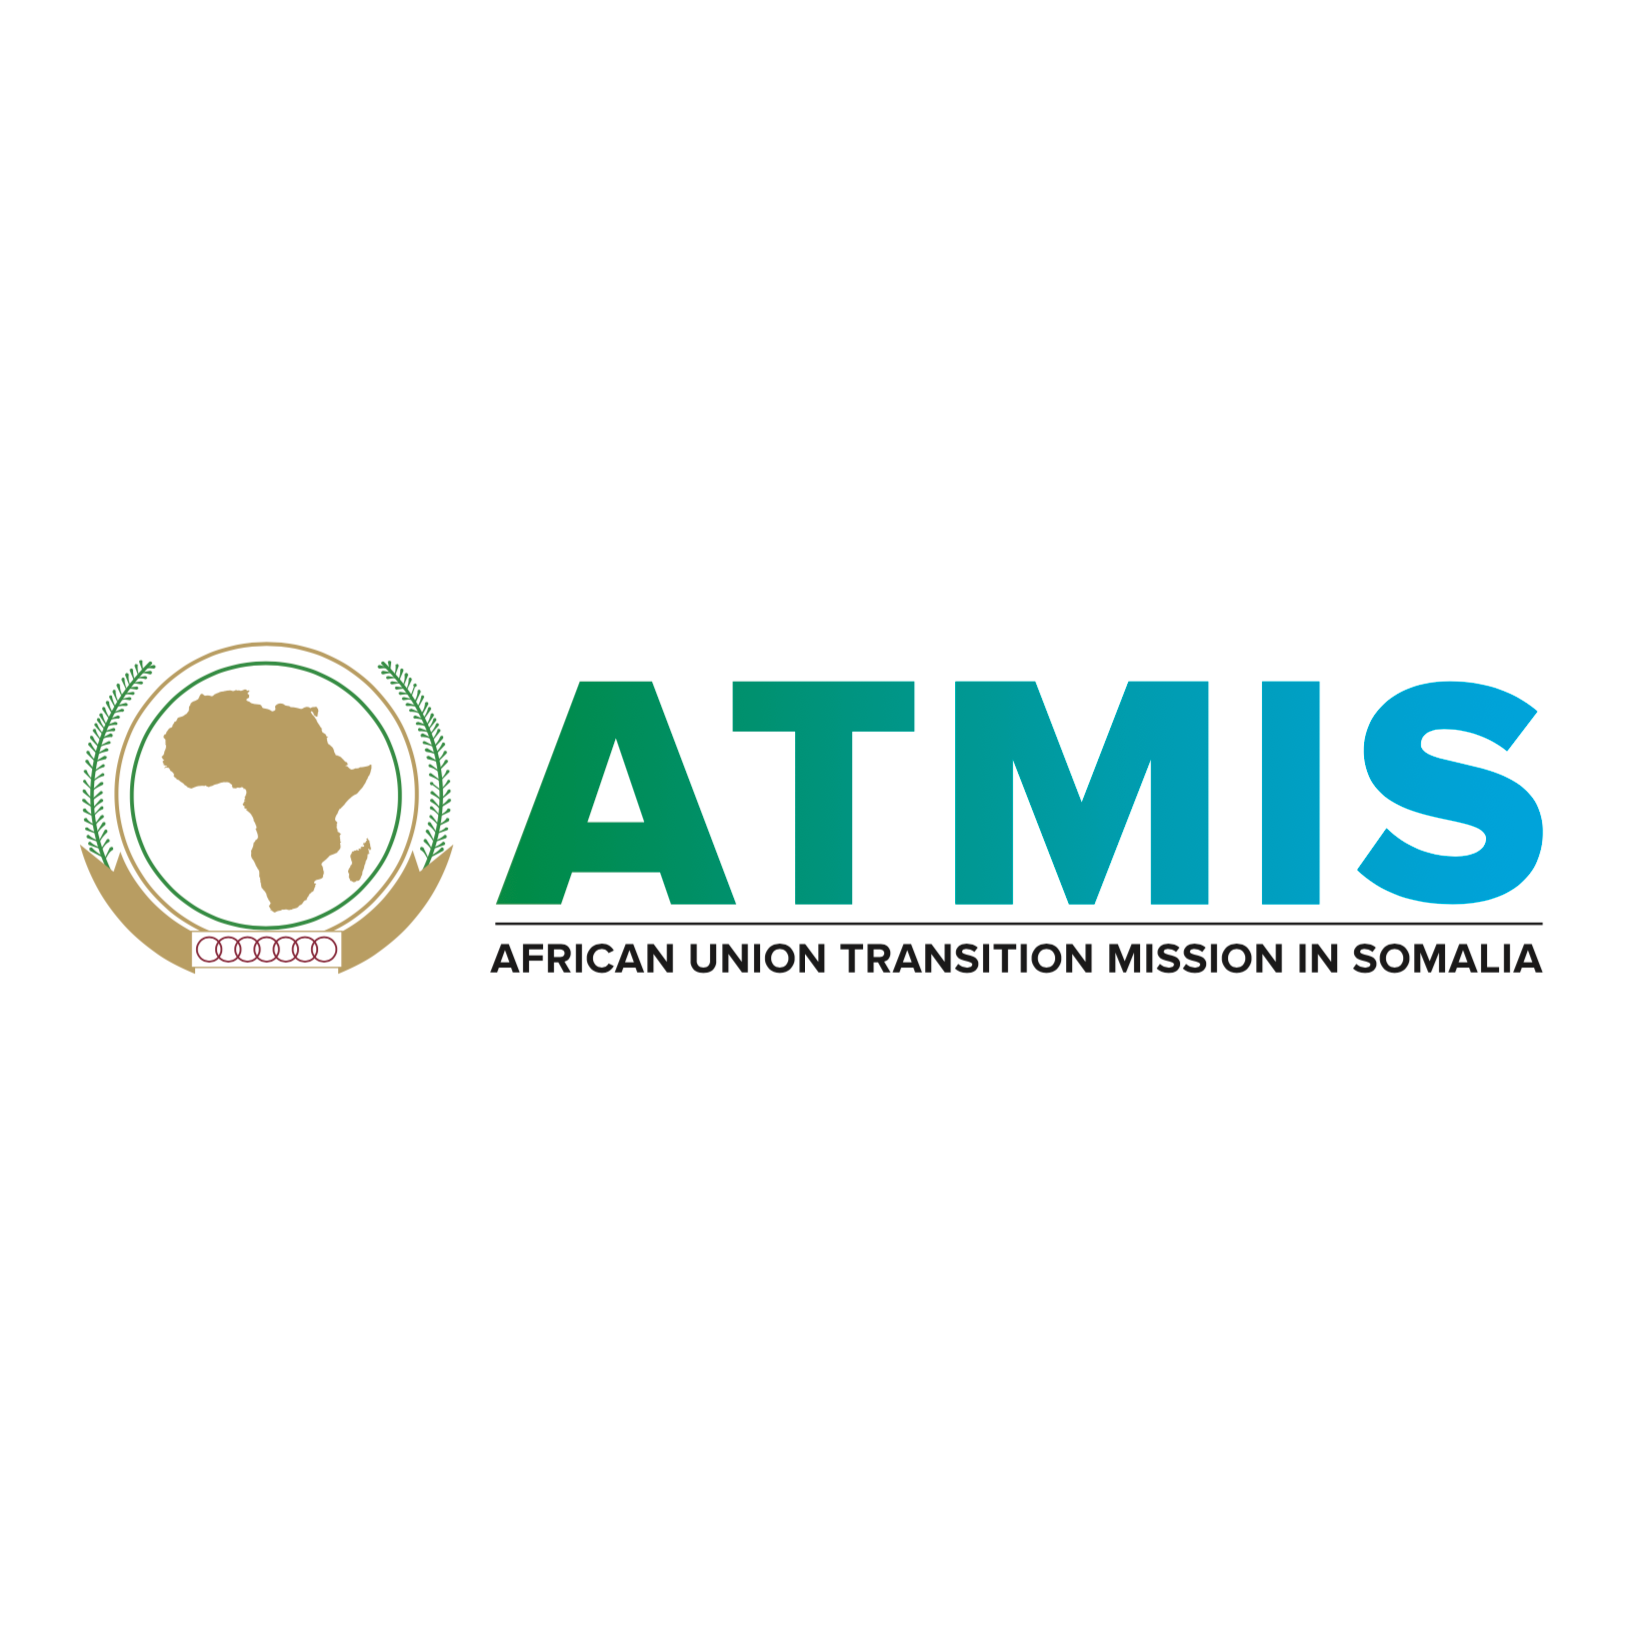 ATMIS - African Union Transition Mission in Somalia